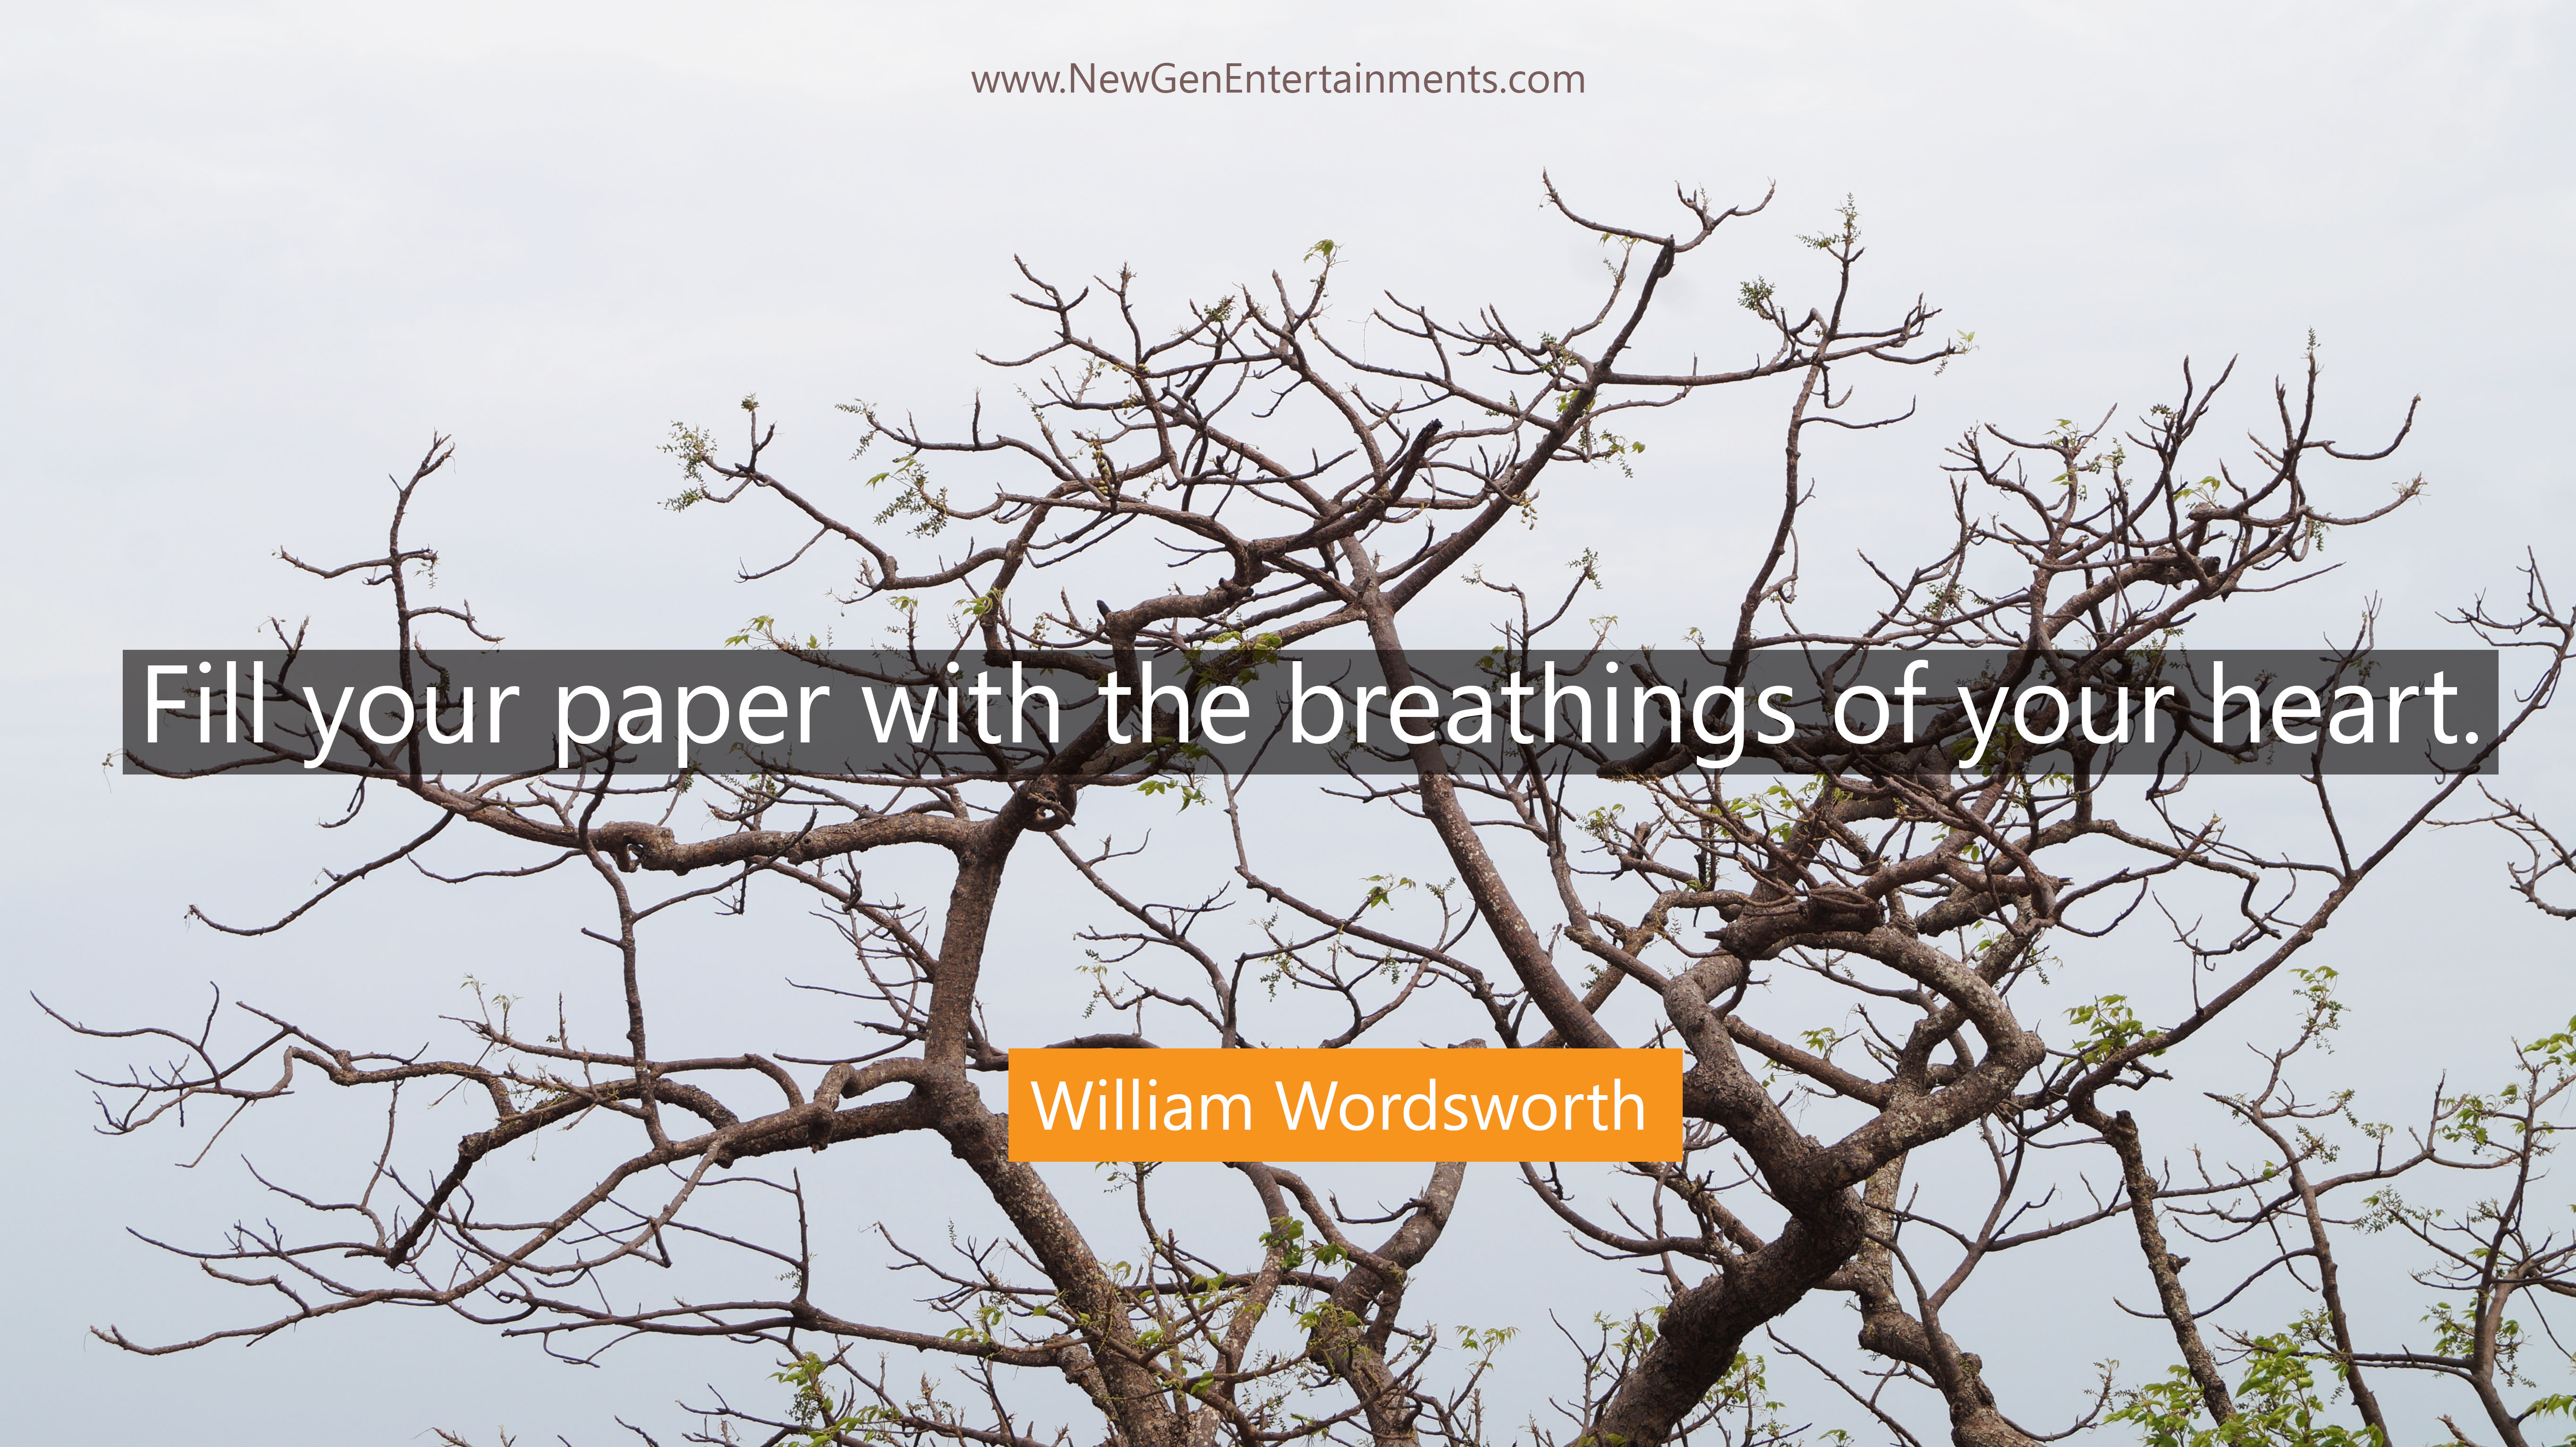 Fill your paper with the breathings of your heart